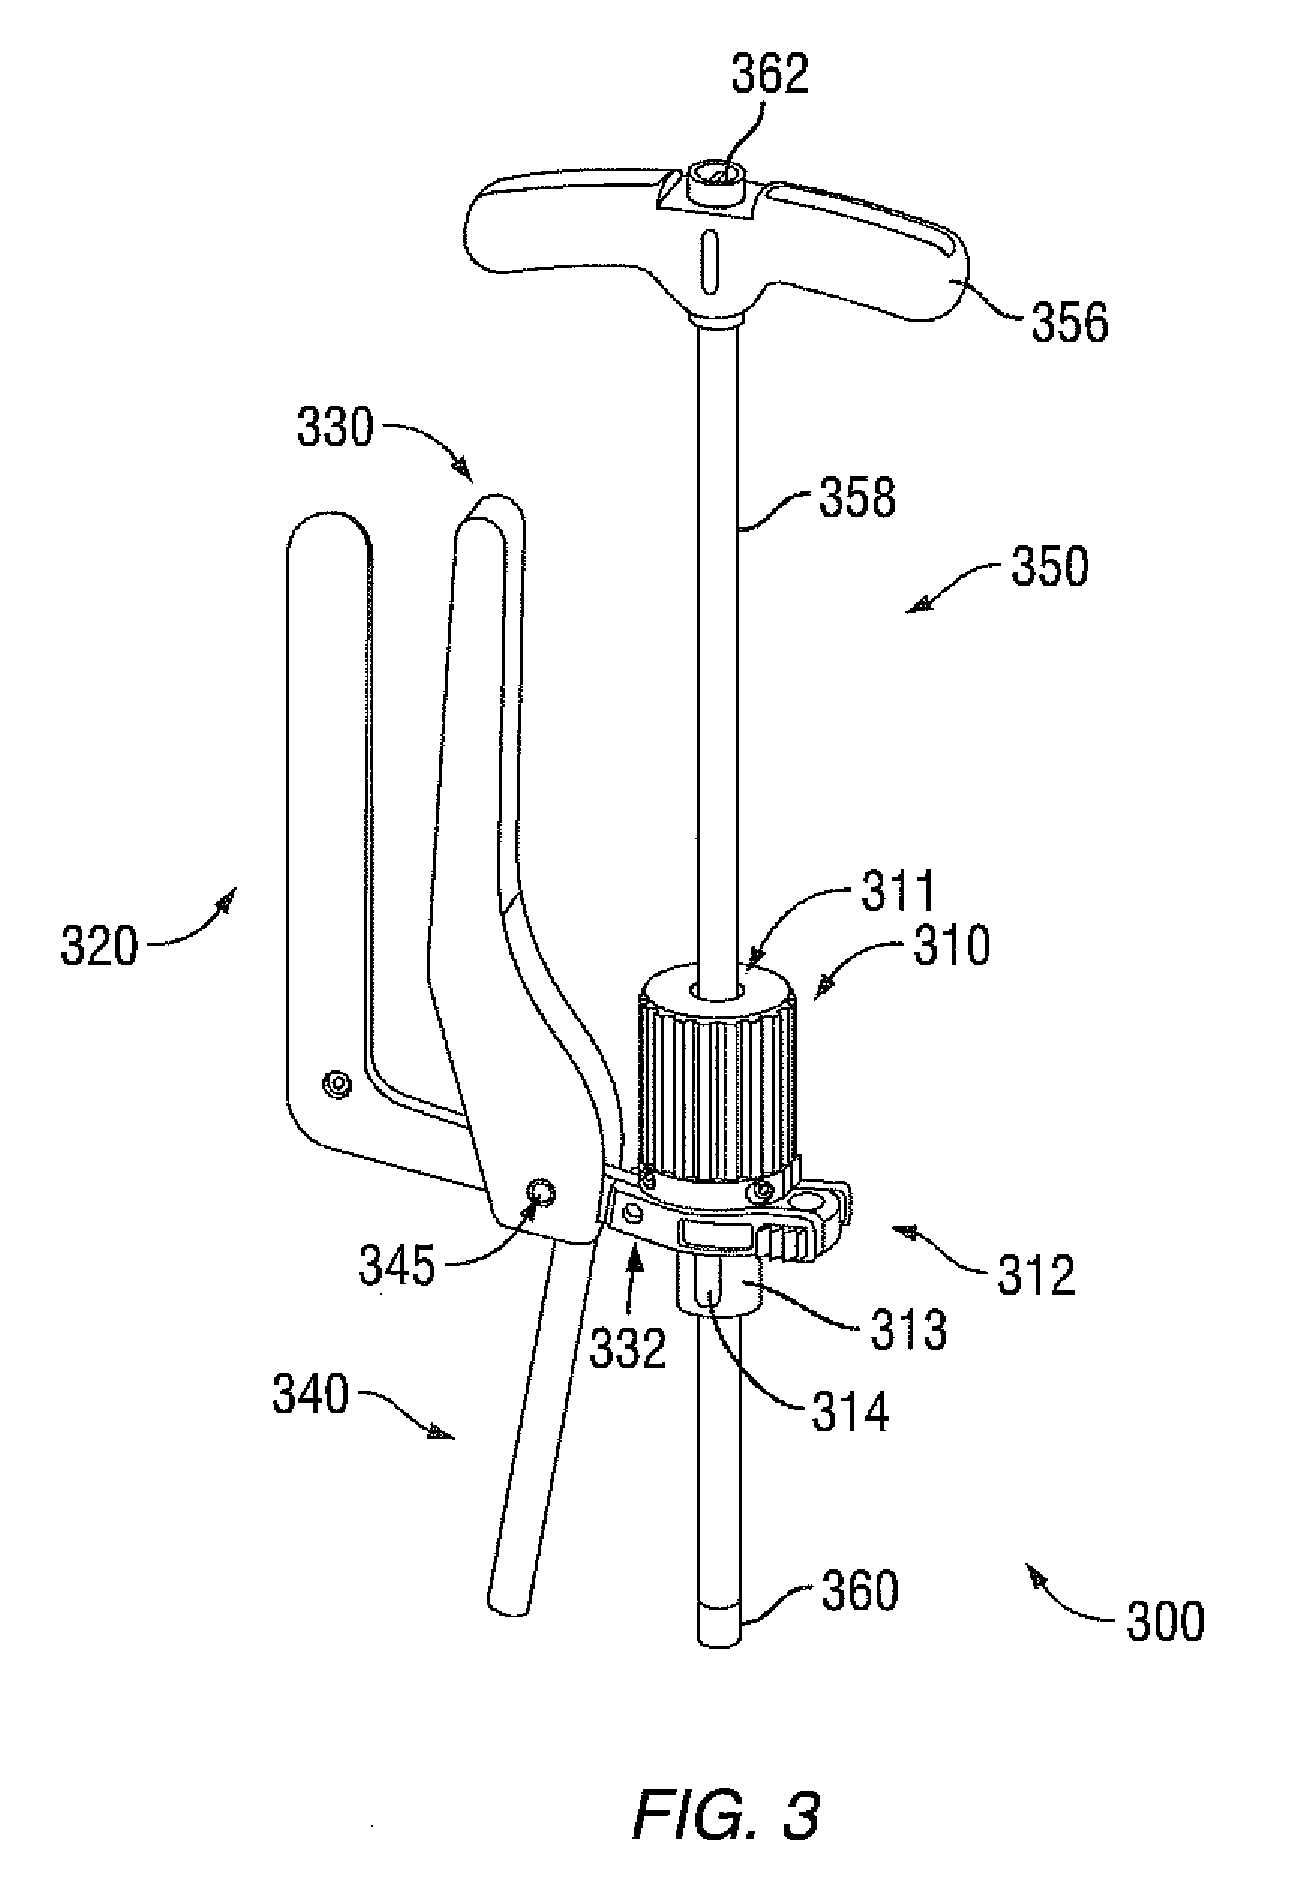 Surgical Instrument With Integrated Reduction And Distraction Mechanisms